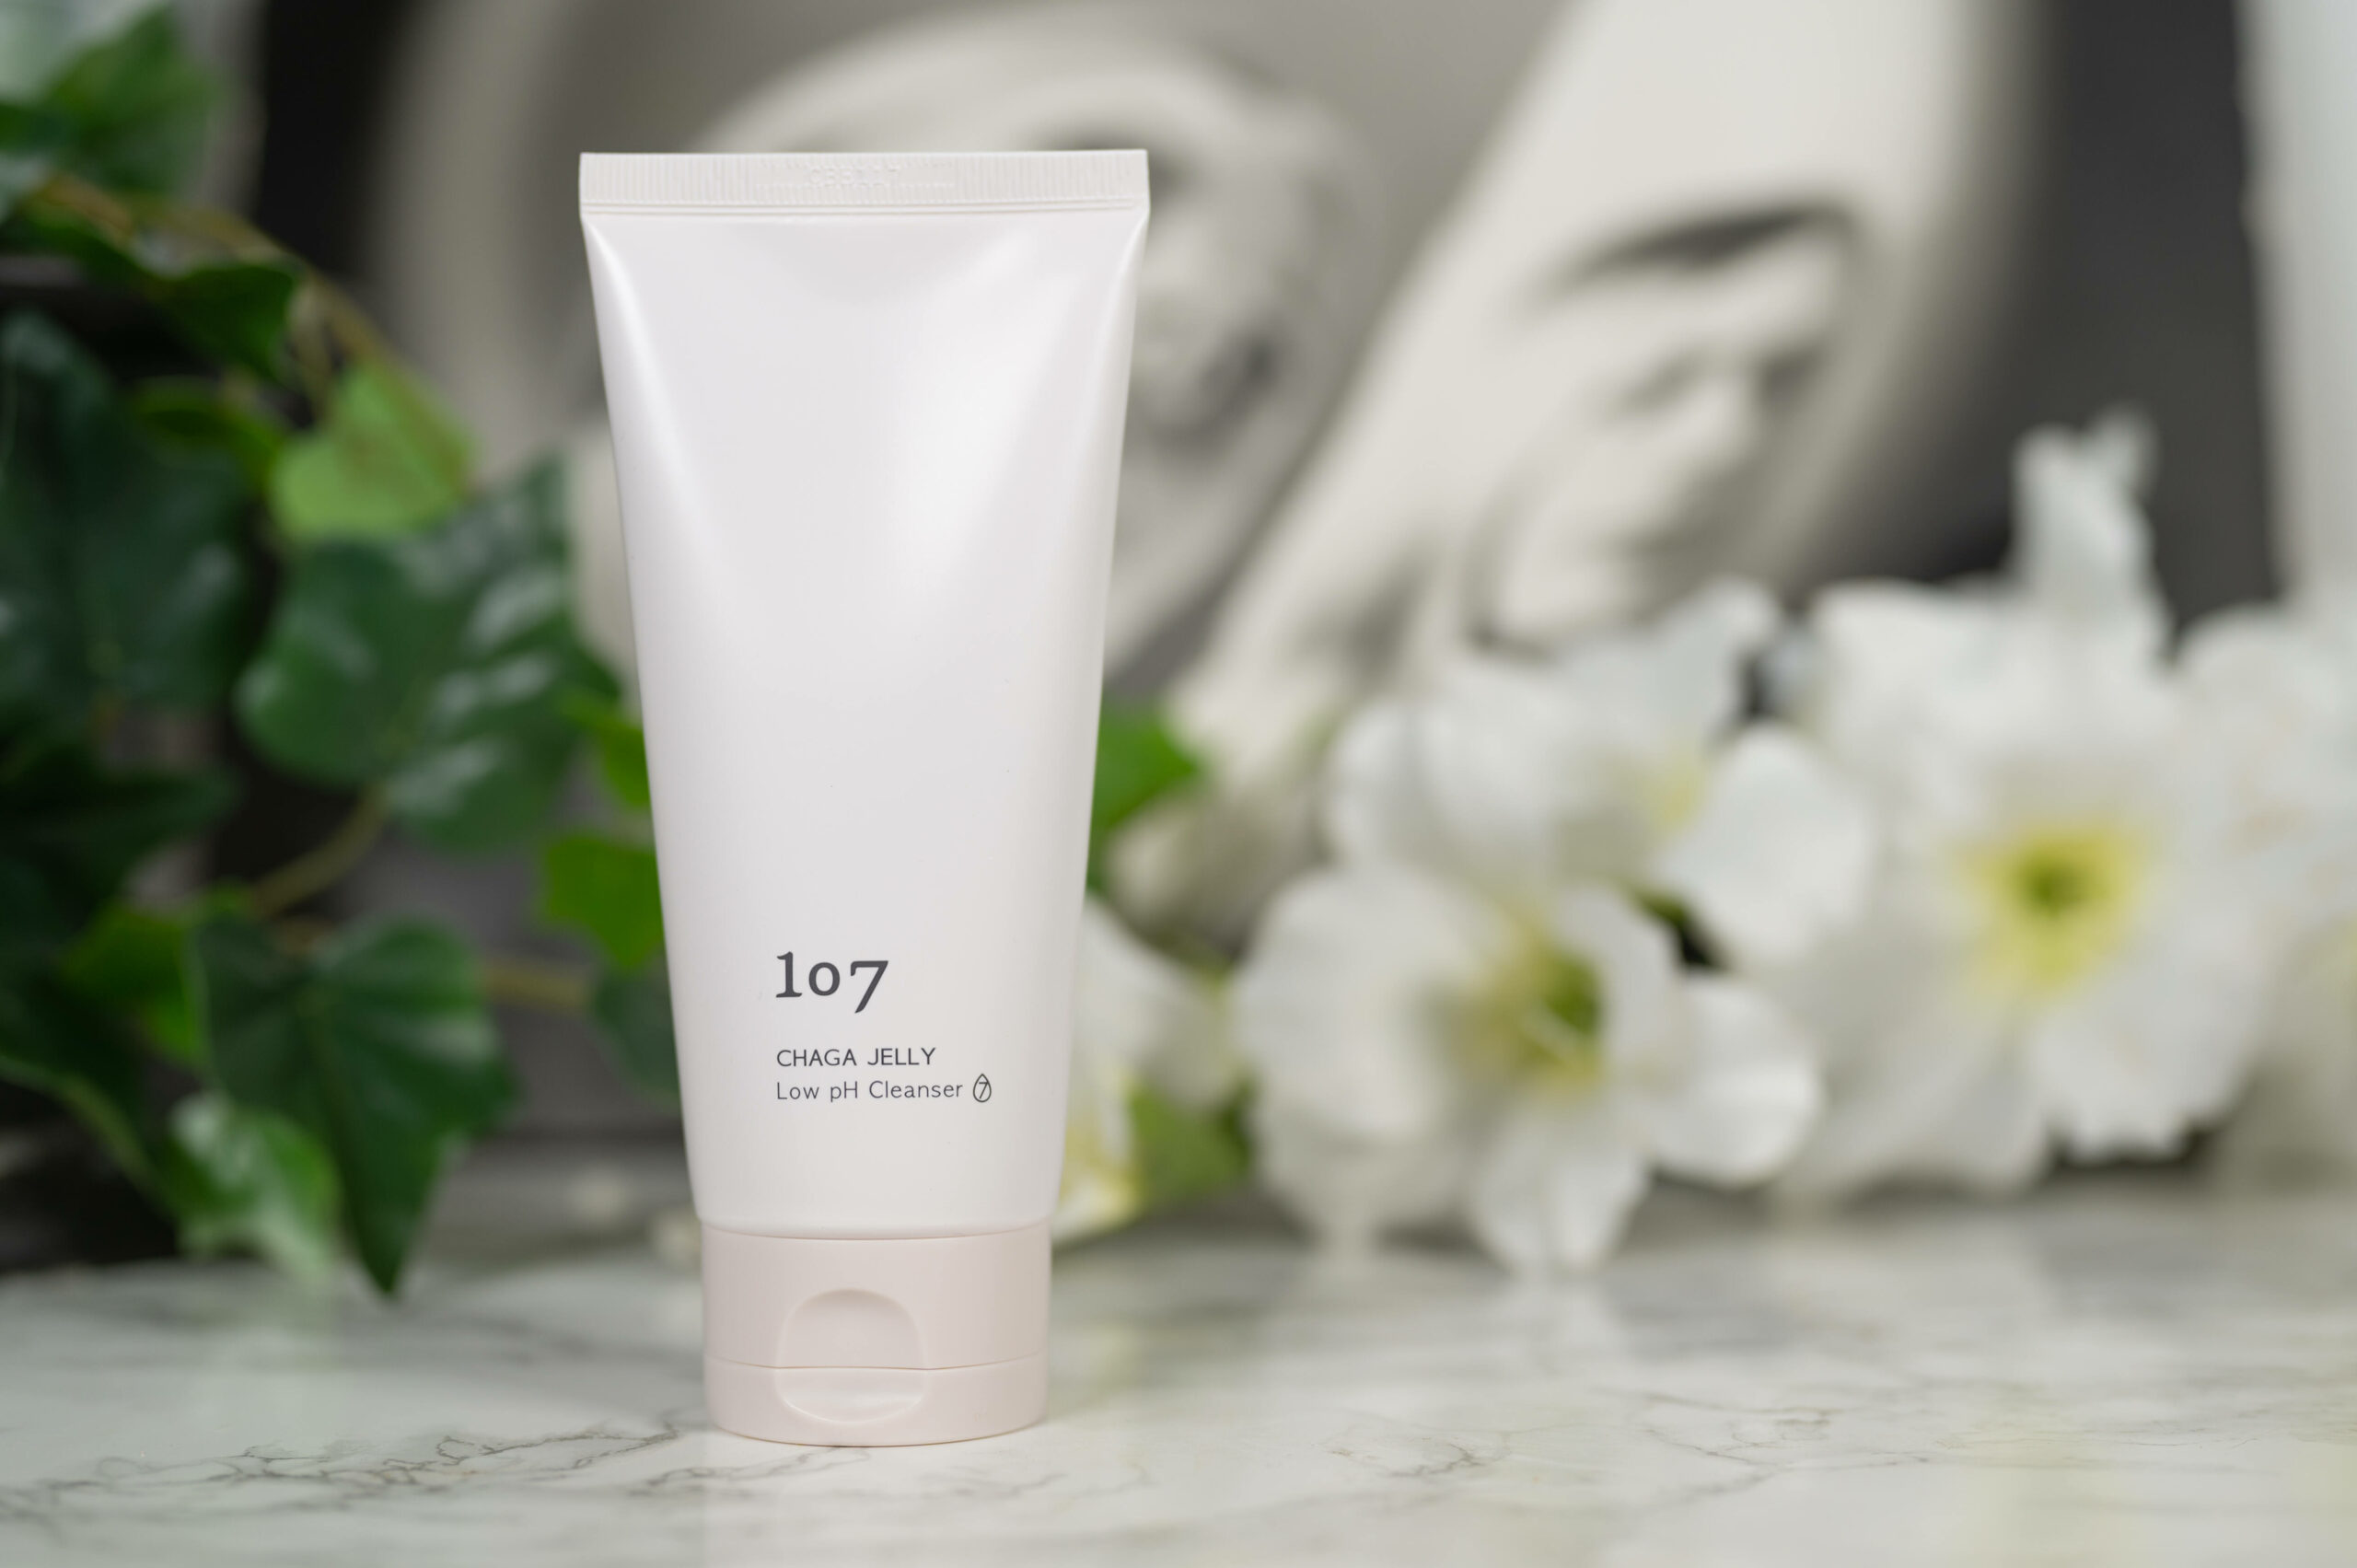 107 Beauty Chaga Jelly low pH Cleanser Review